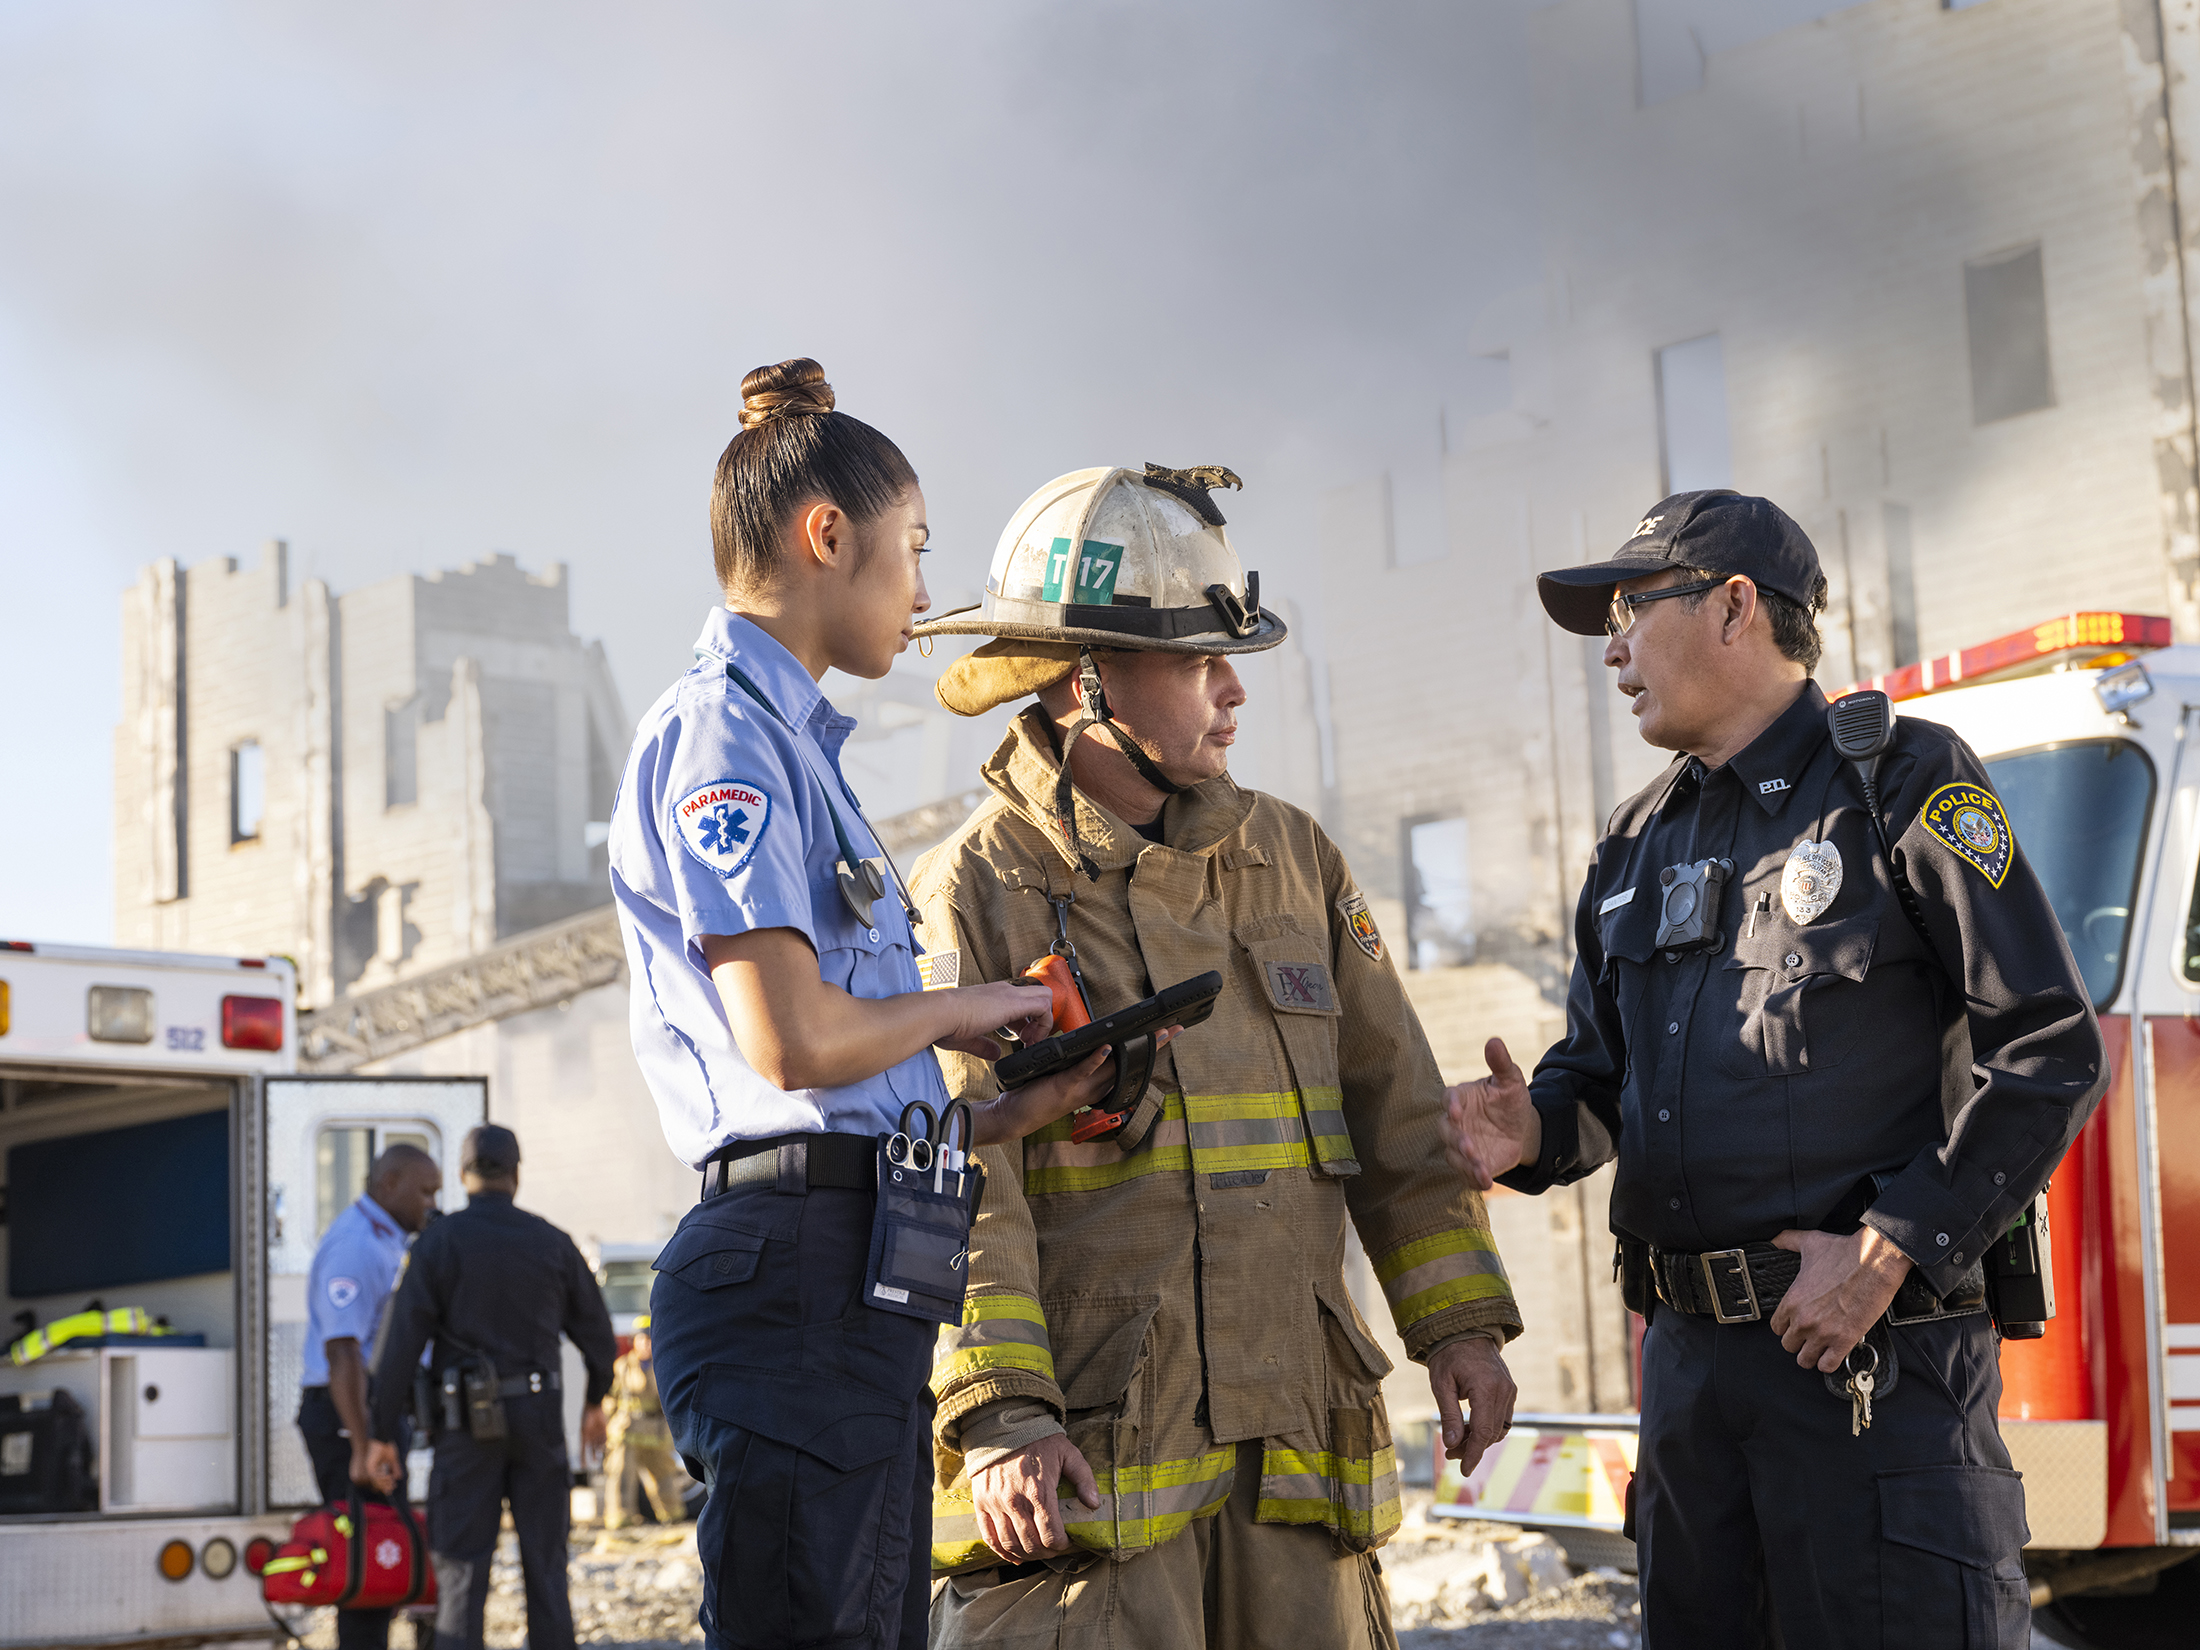 3. Verizon's Commitment to Public Safety Communications